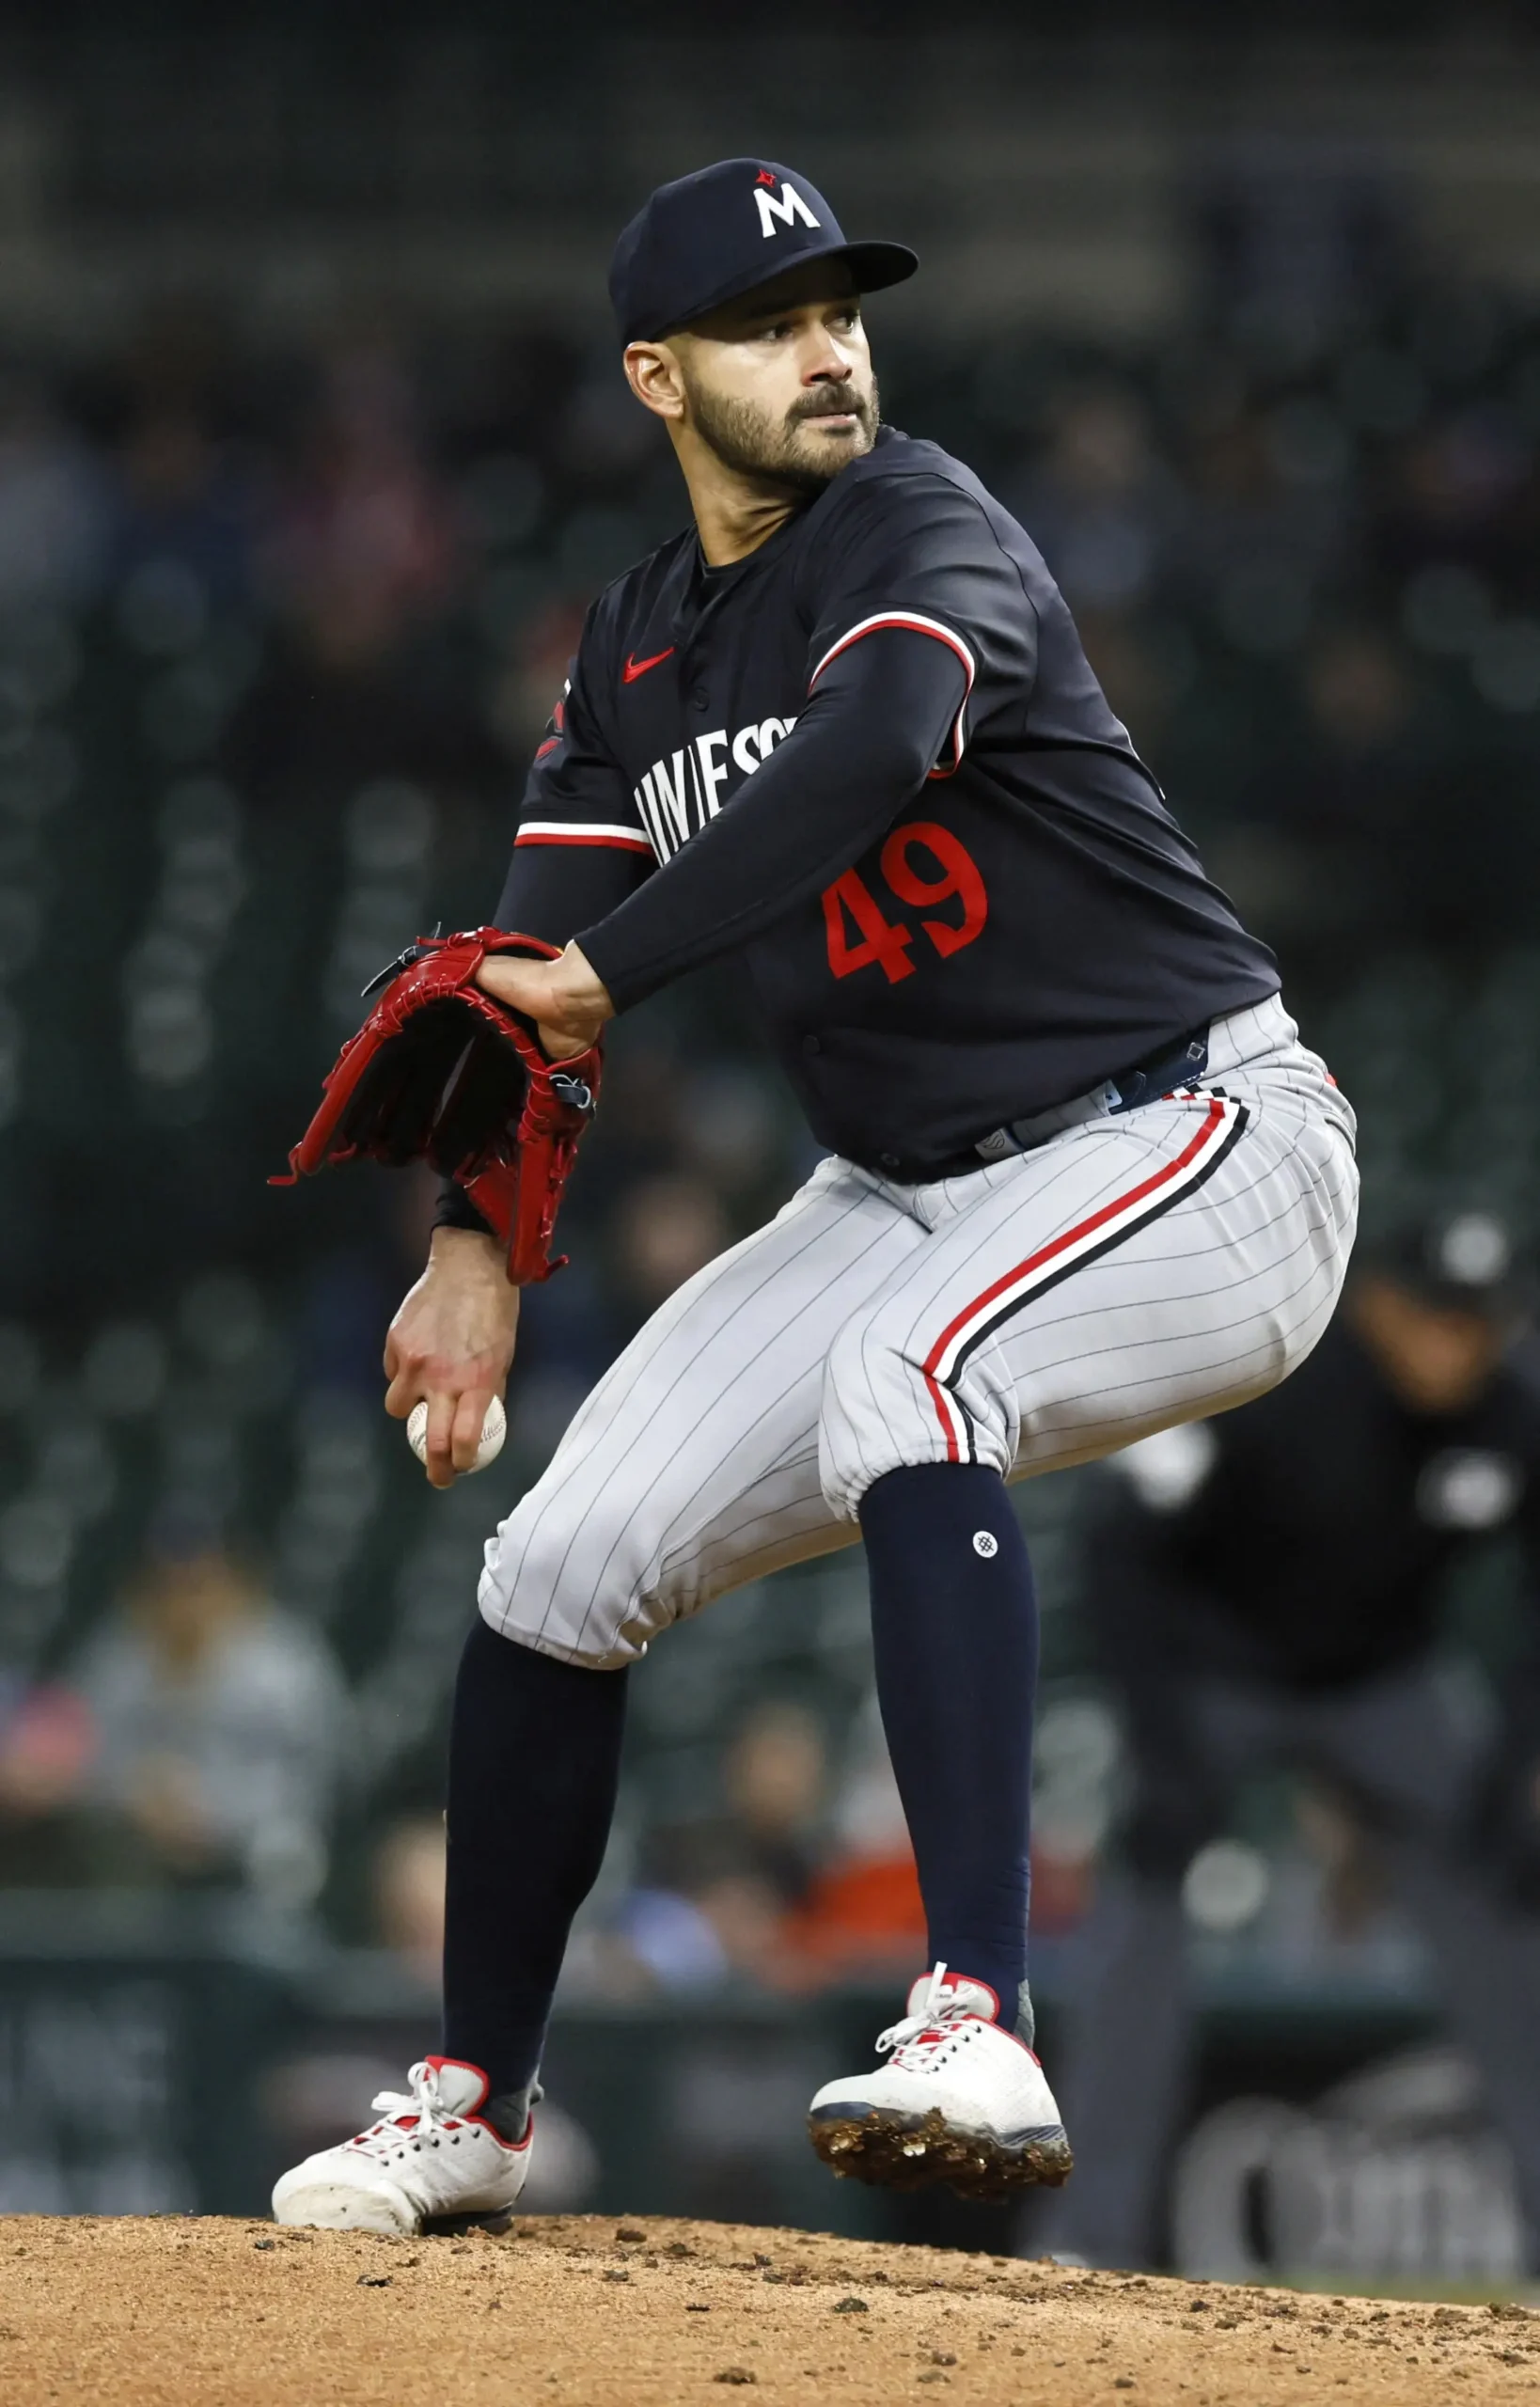 Ride Pablo Lopez, Fade Patrick Corbin in Tuesday’s Player Prop Bets